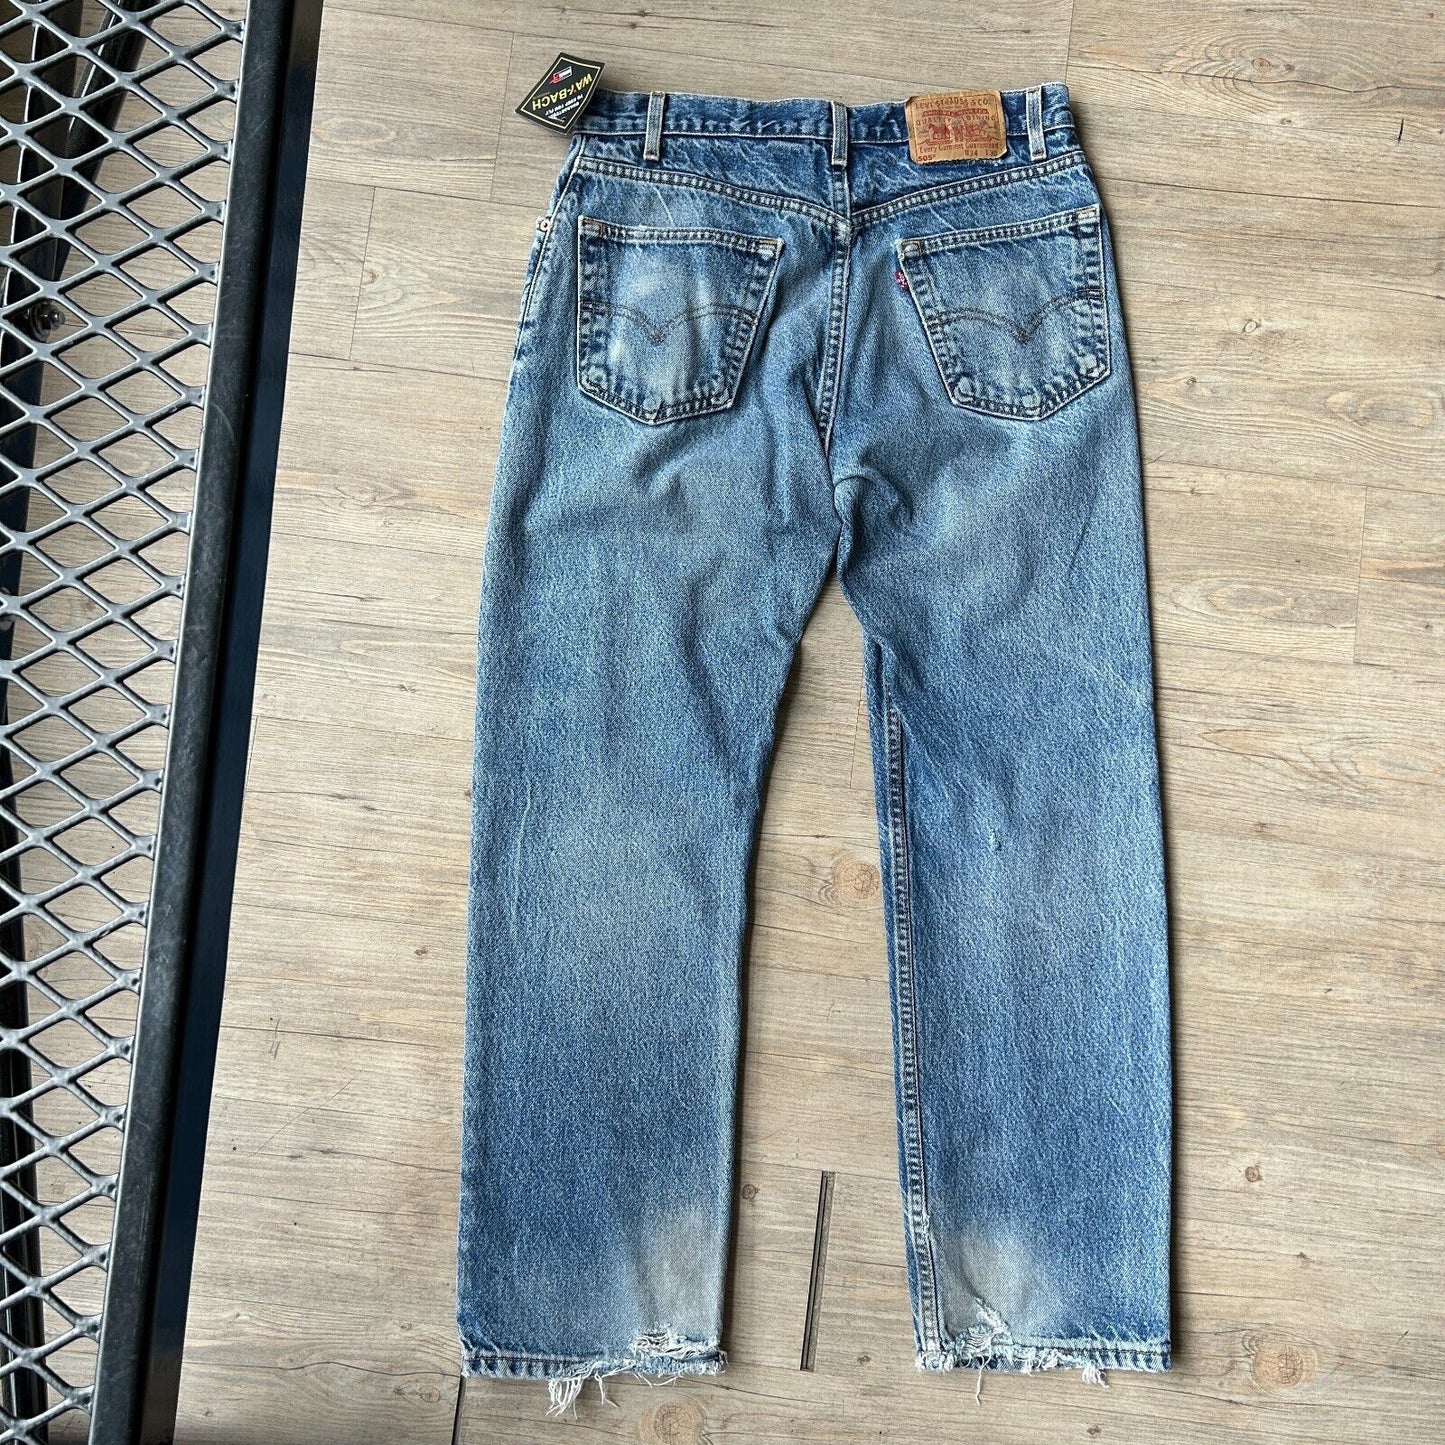 VINTAGE 90s | LEVIS 505 Faded Regular Fit Jeans Pants sz W33 L30 Made In USA